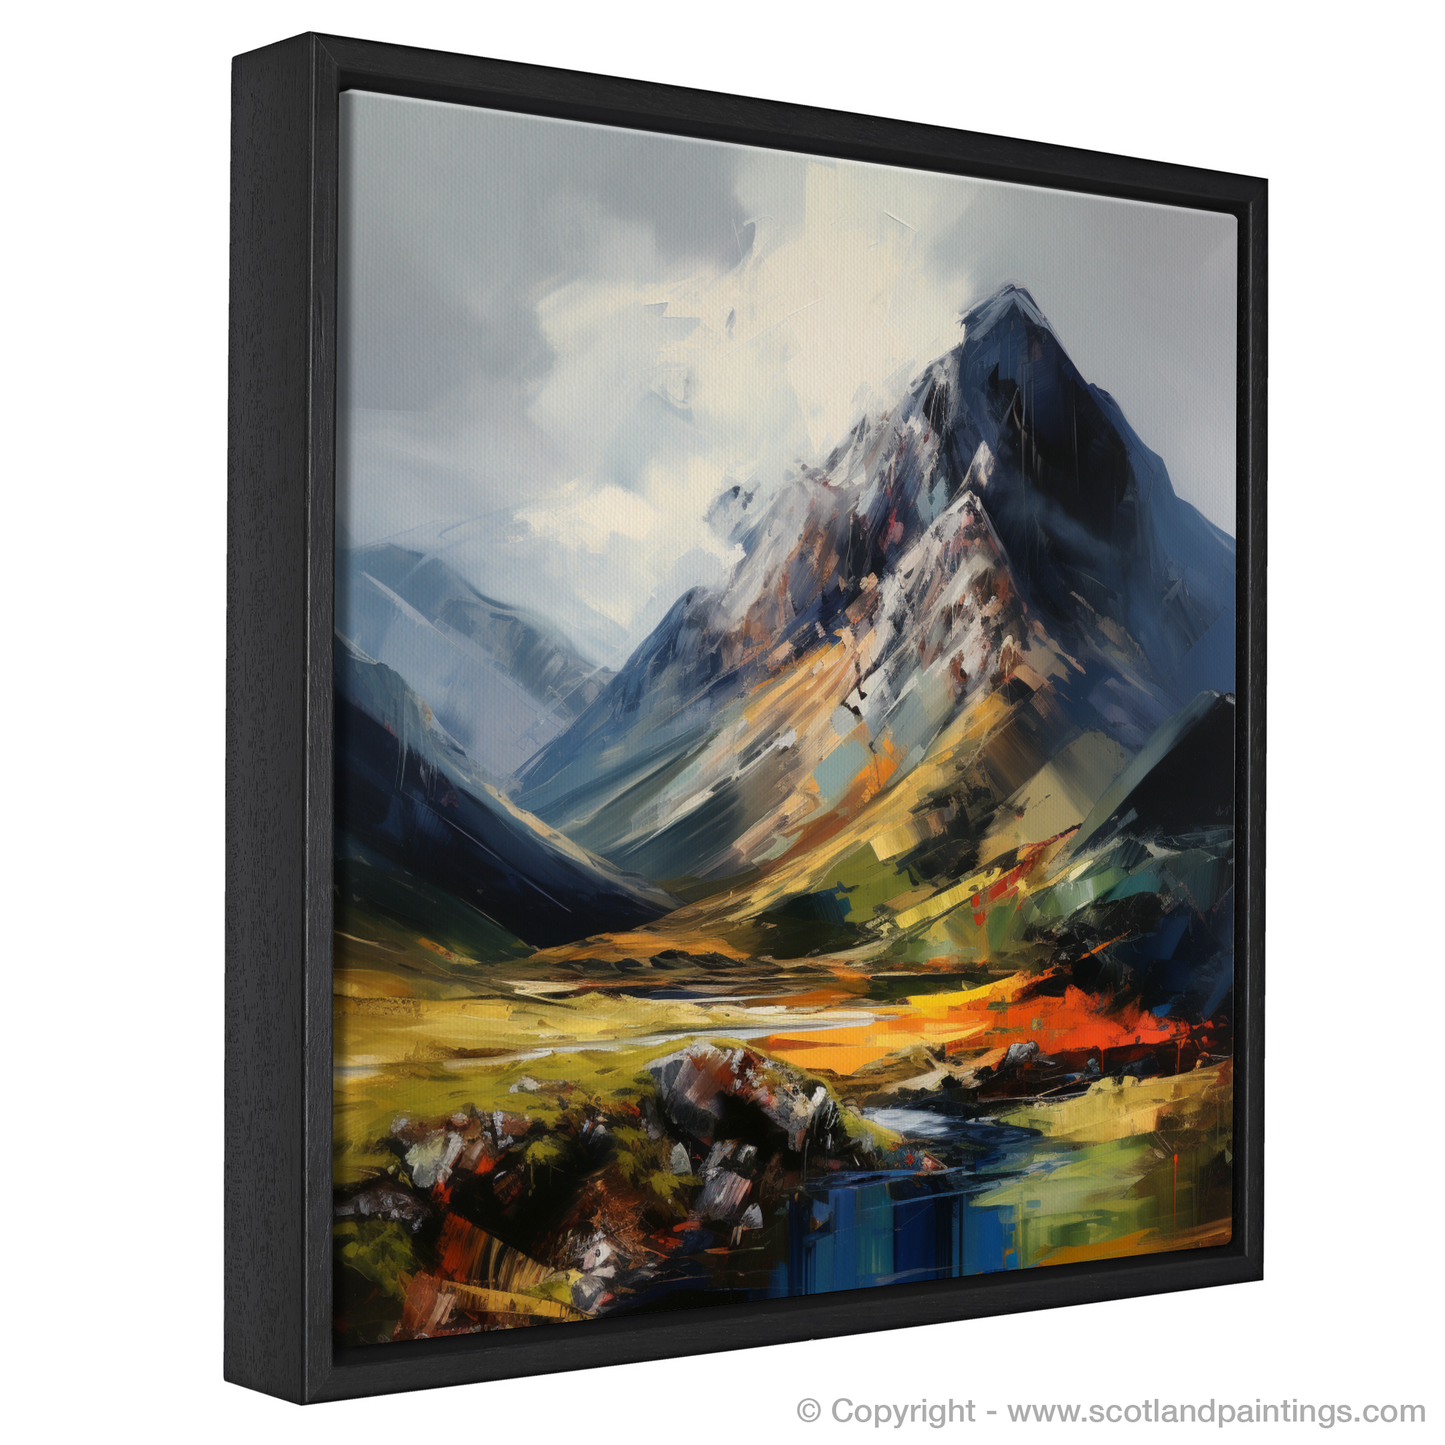 Painting and Art Print of Sgurr a' Mhaim, Highlands. entitled "Highland Majesty: An Expressionist Ode to Sgurr a' Mhaim".